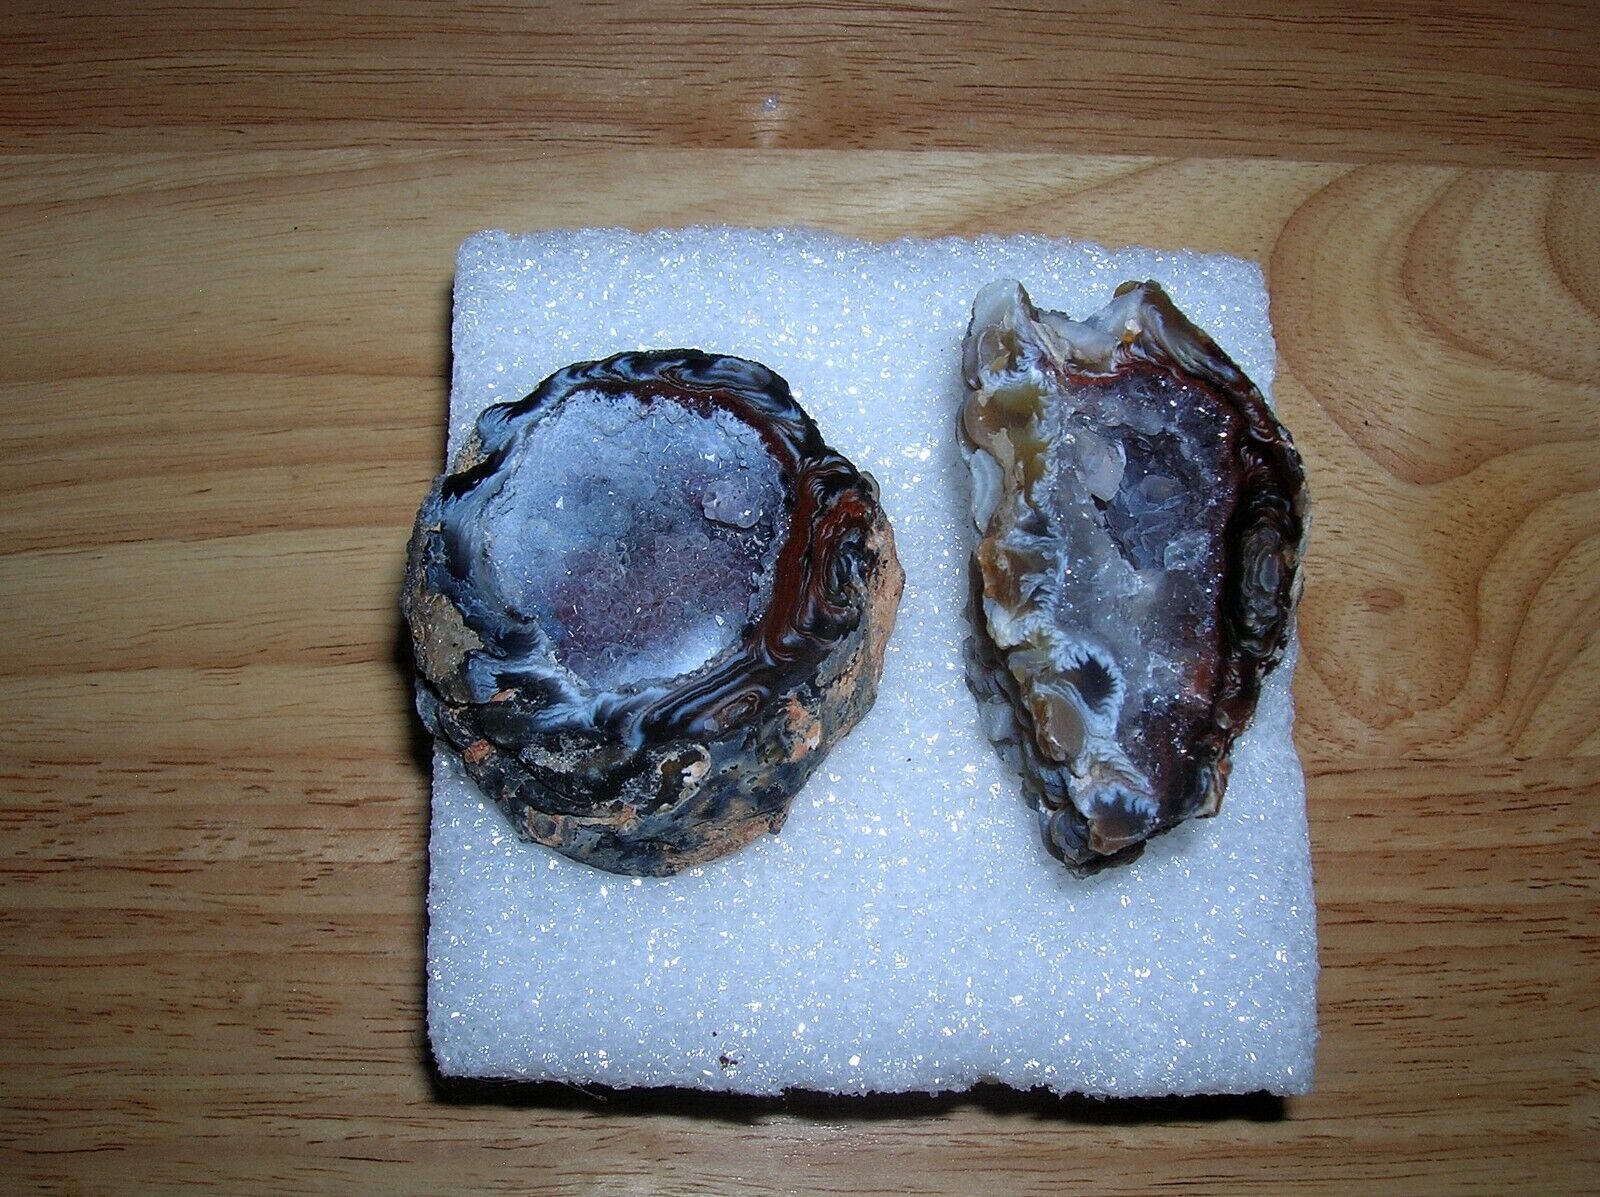 2 OCCO GEODES from Brazil 1/4 lb.+ You get the 2 in picture.